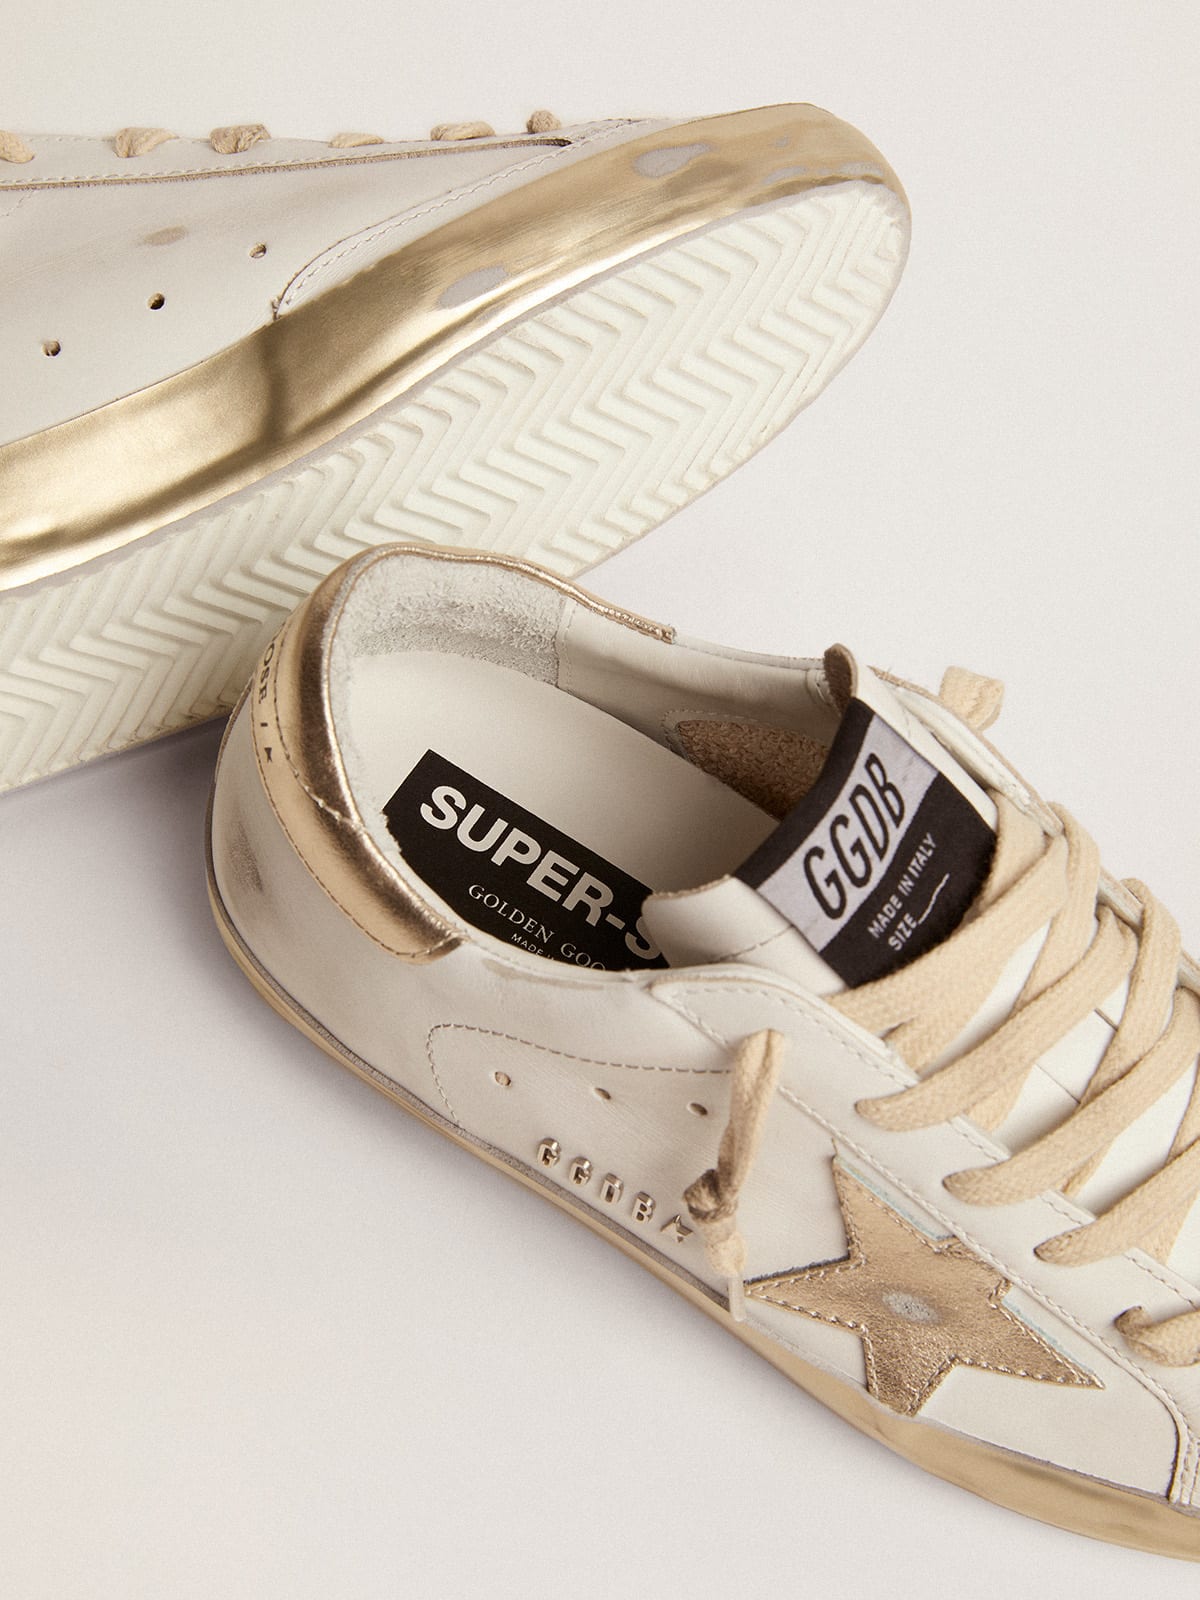 Women's Super-Star sneakers with gold foxing | Golden Goose